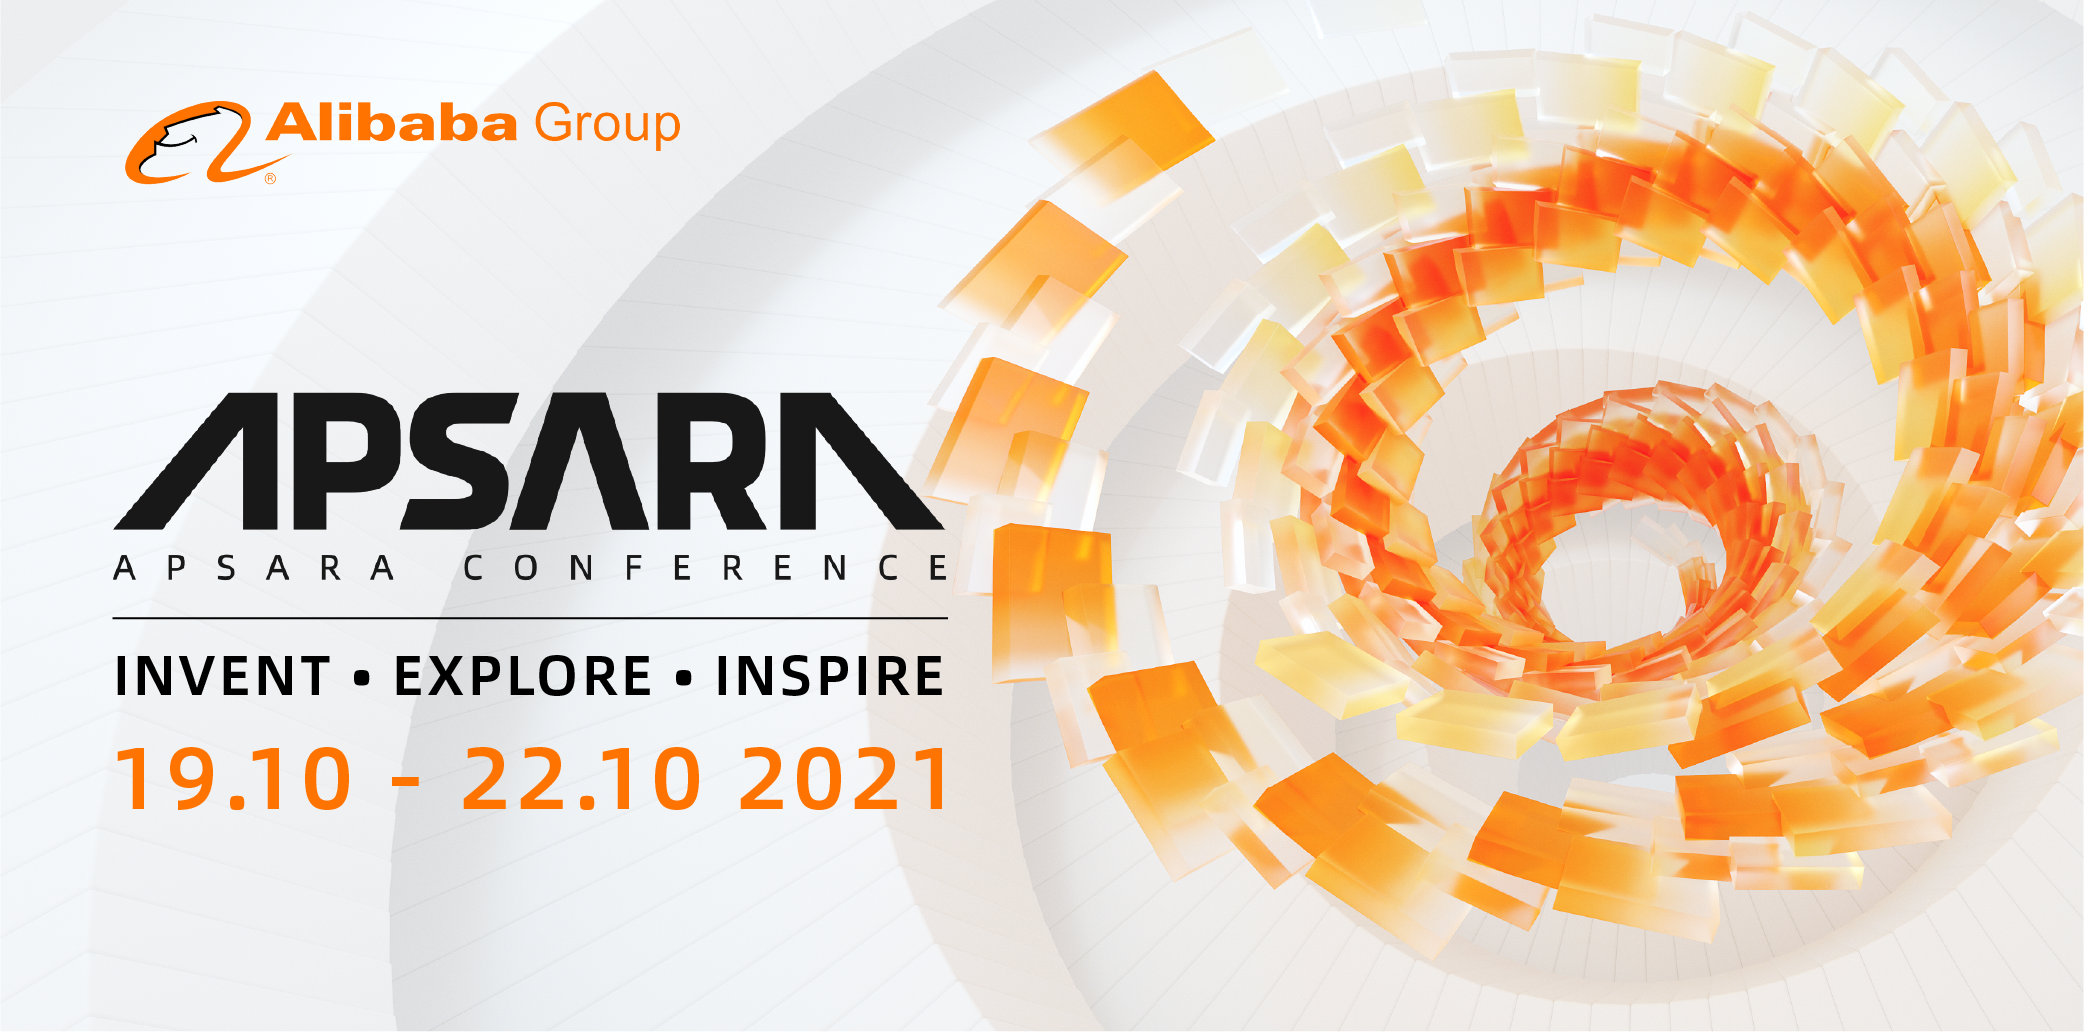 Tune into Alibaba Group’s 2021 Apsara Conference from October 19 to 22